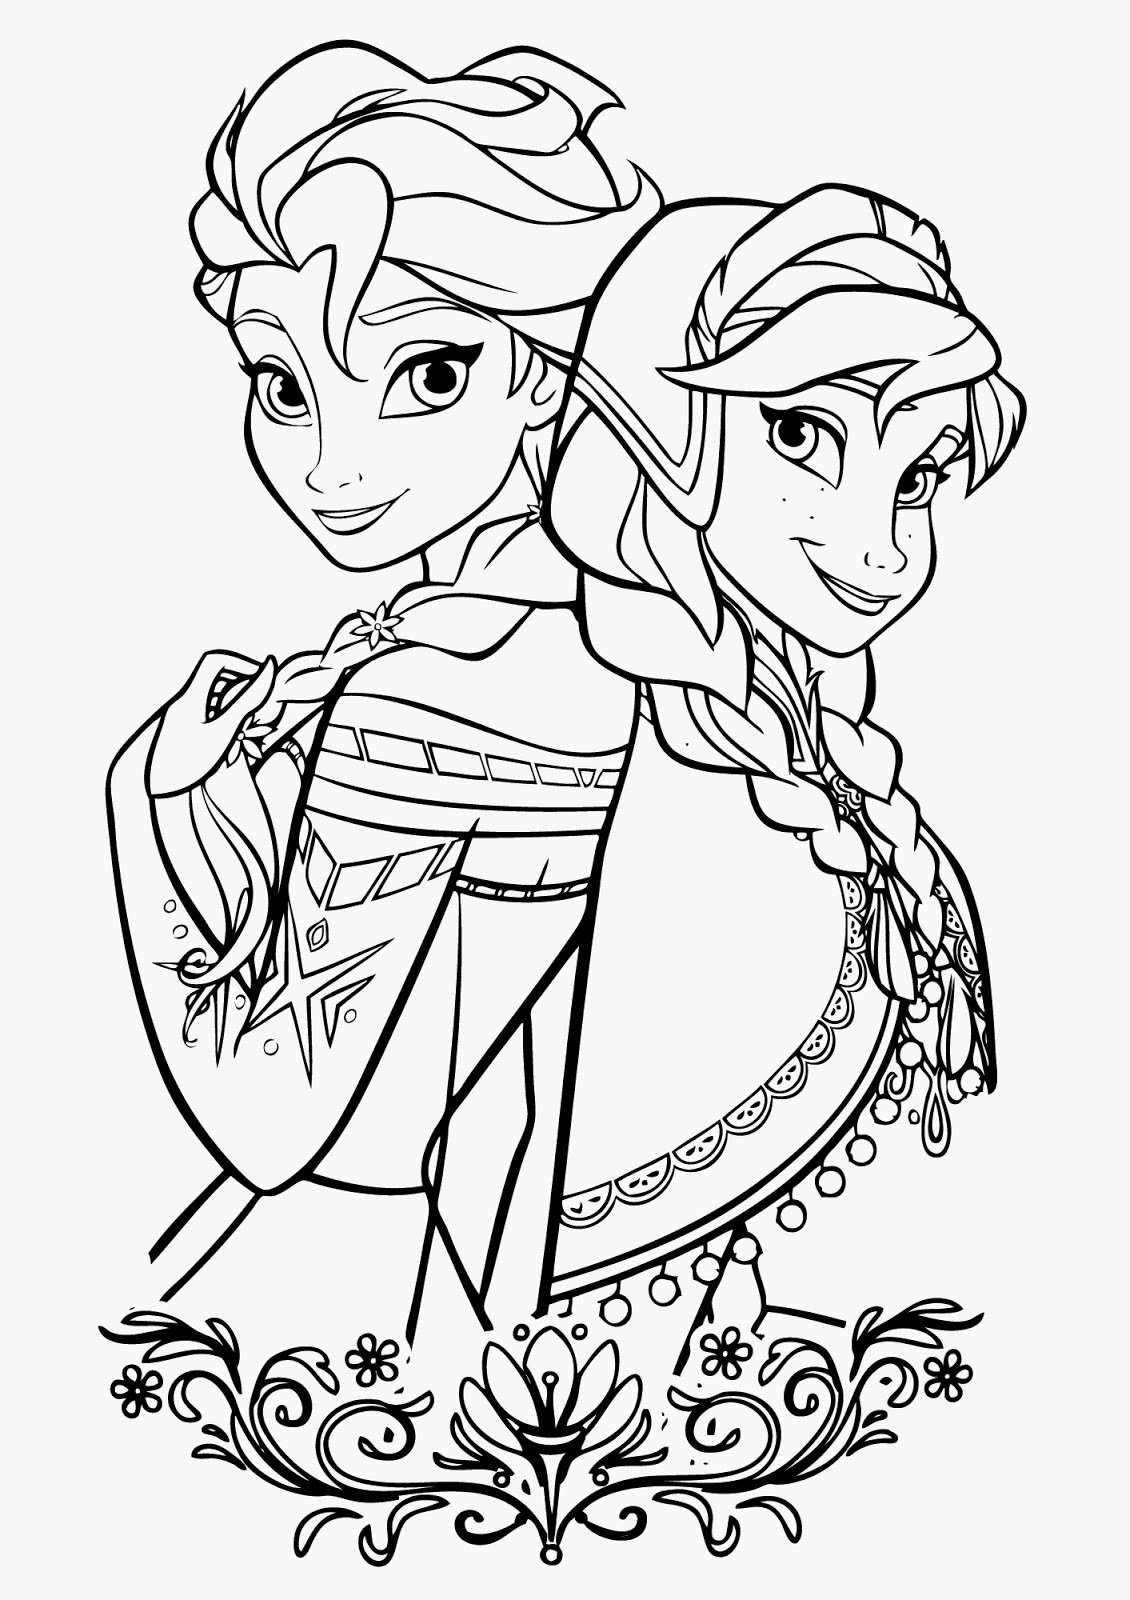 Free Frozen Printable Coloring Pages
 15 Beautiful Disney Frozen Coloring Pages Free Instant